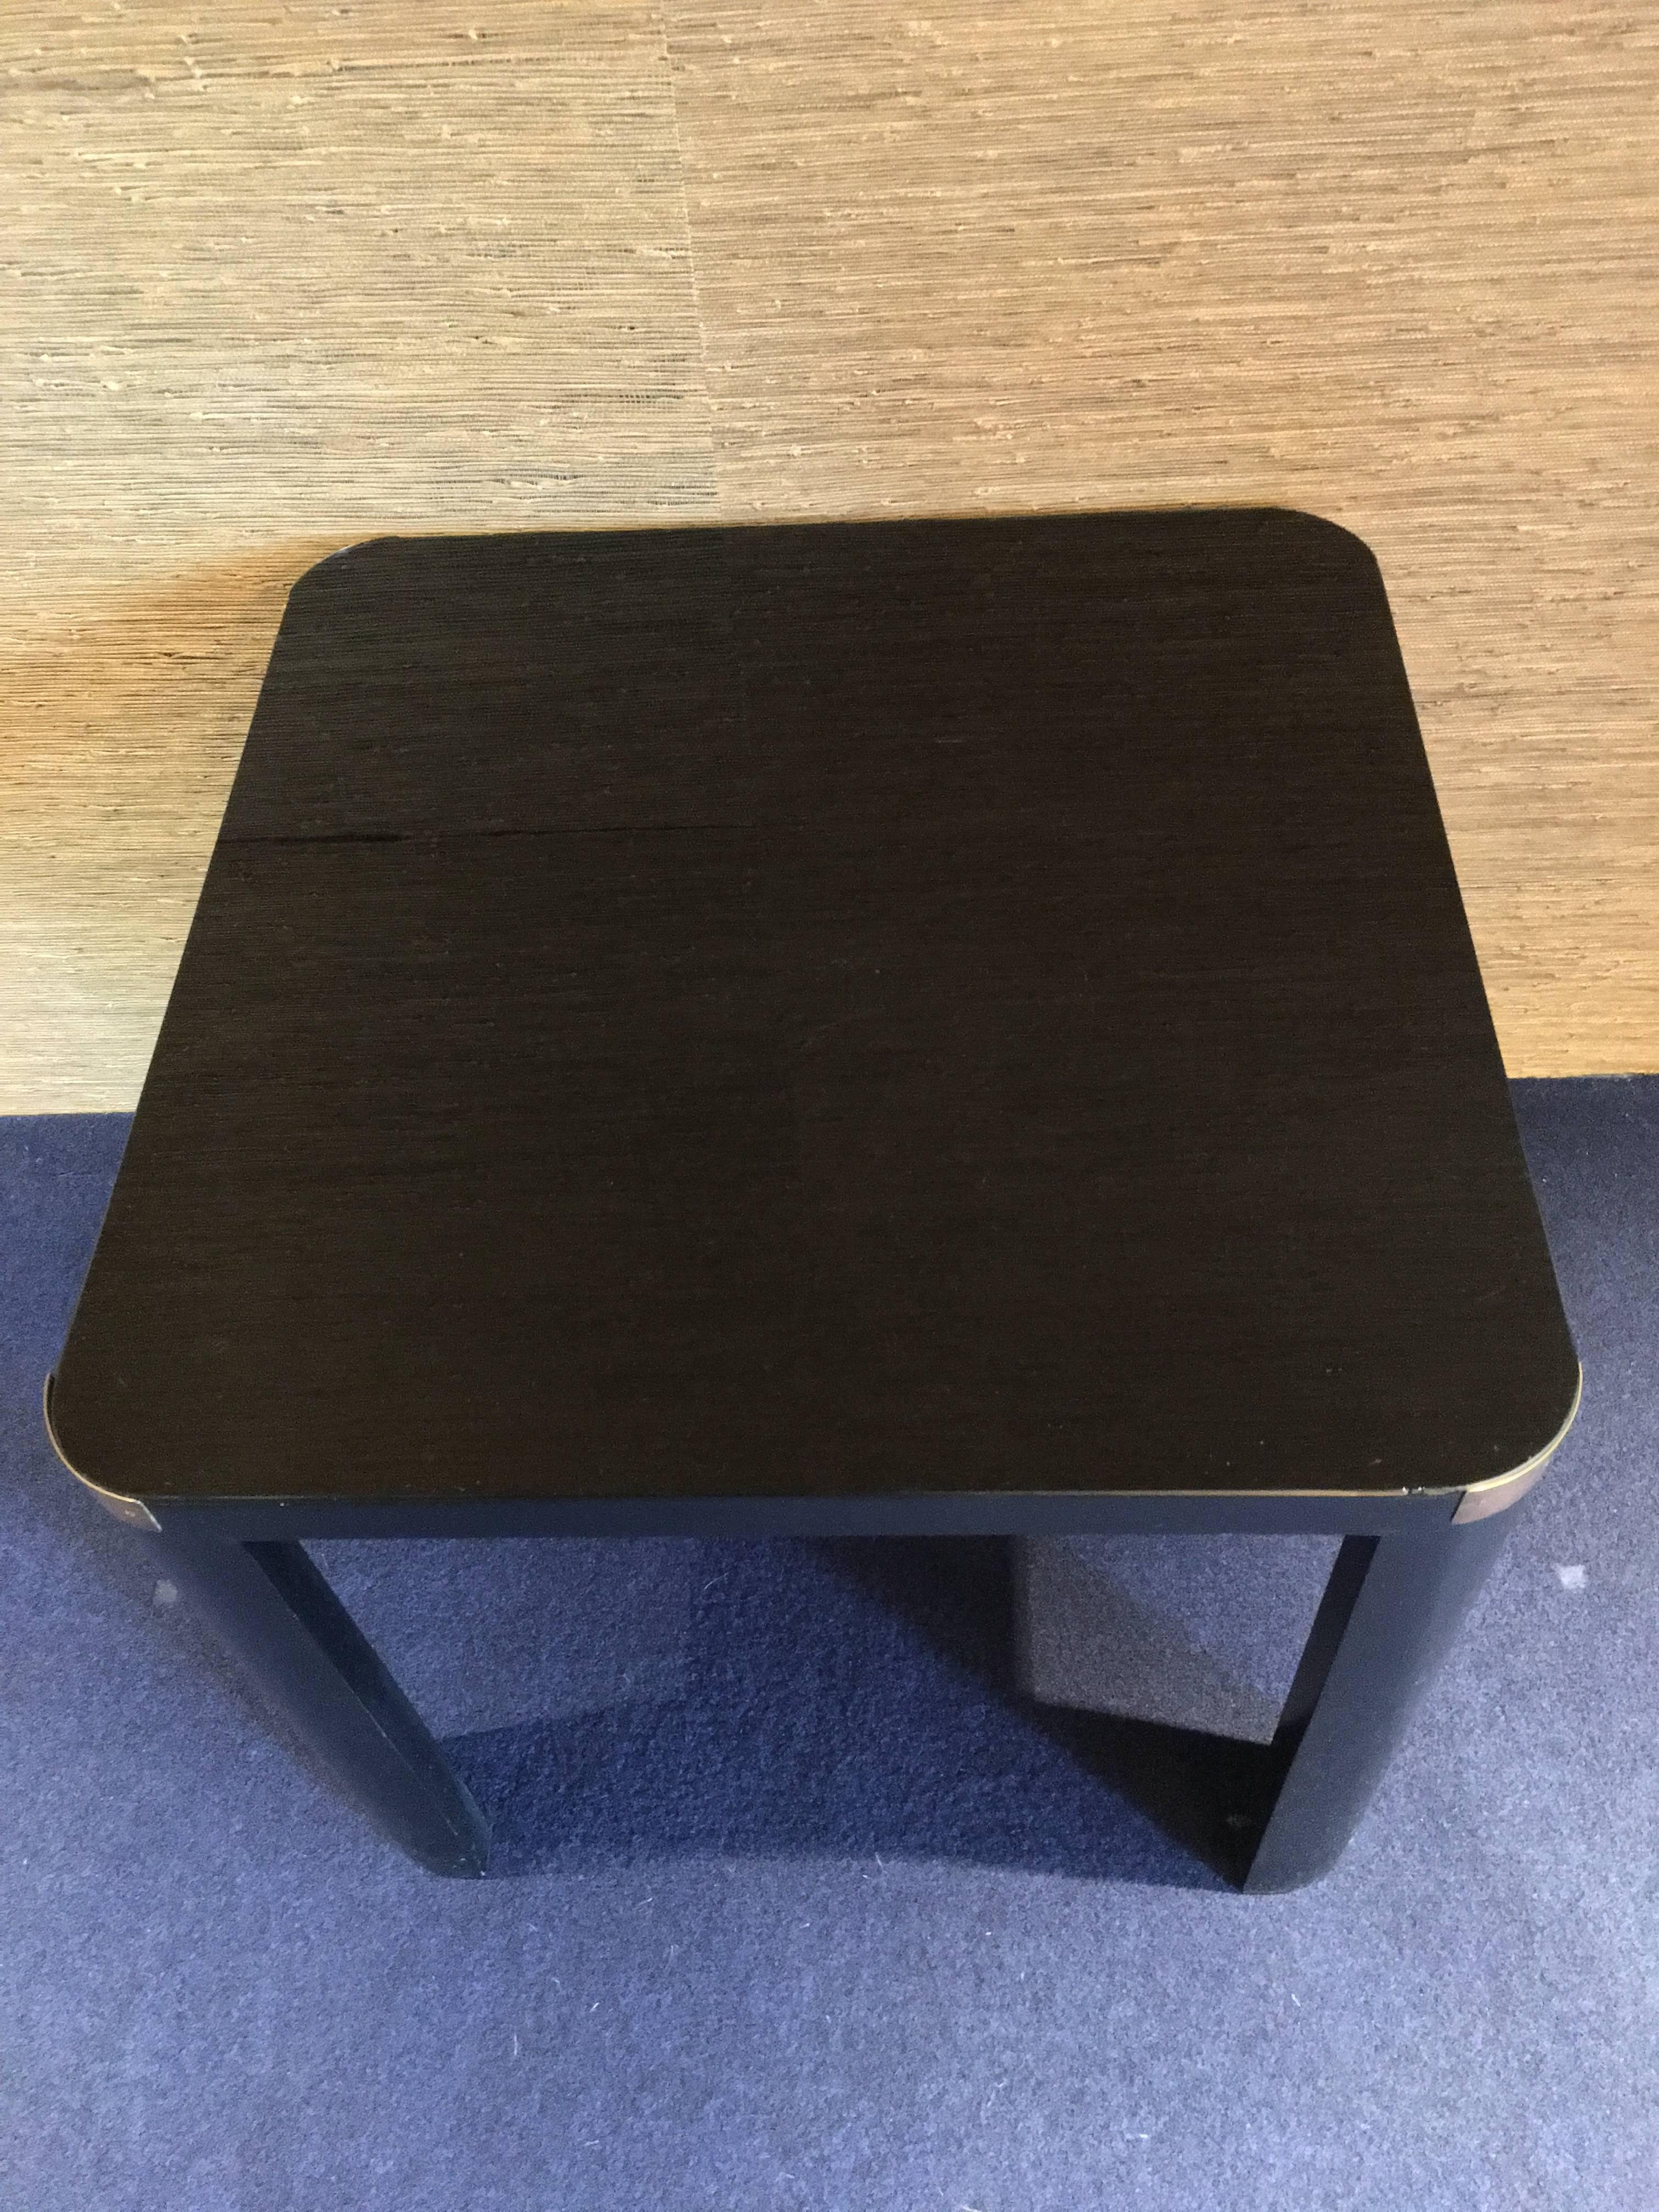 Vintage table coffee, made in Italy. Art Deco period. Black wooden structure, black glass top, brass details and white ceramic for the little shelves.